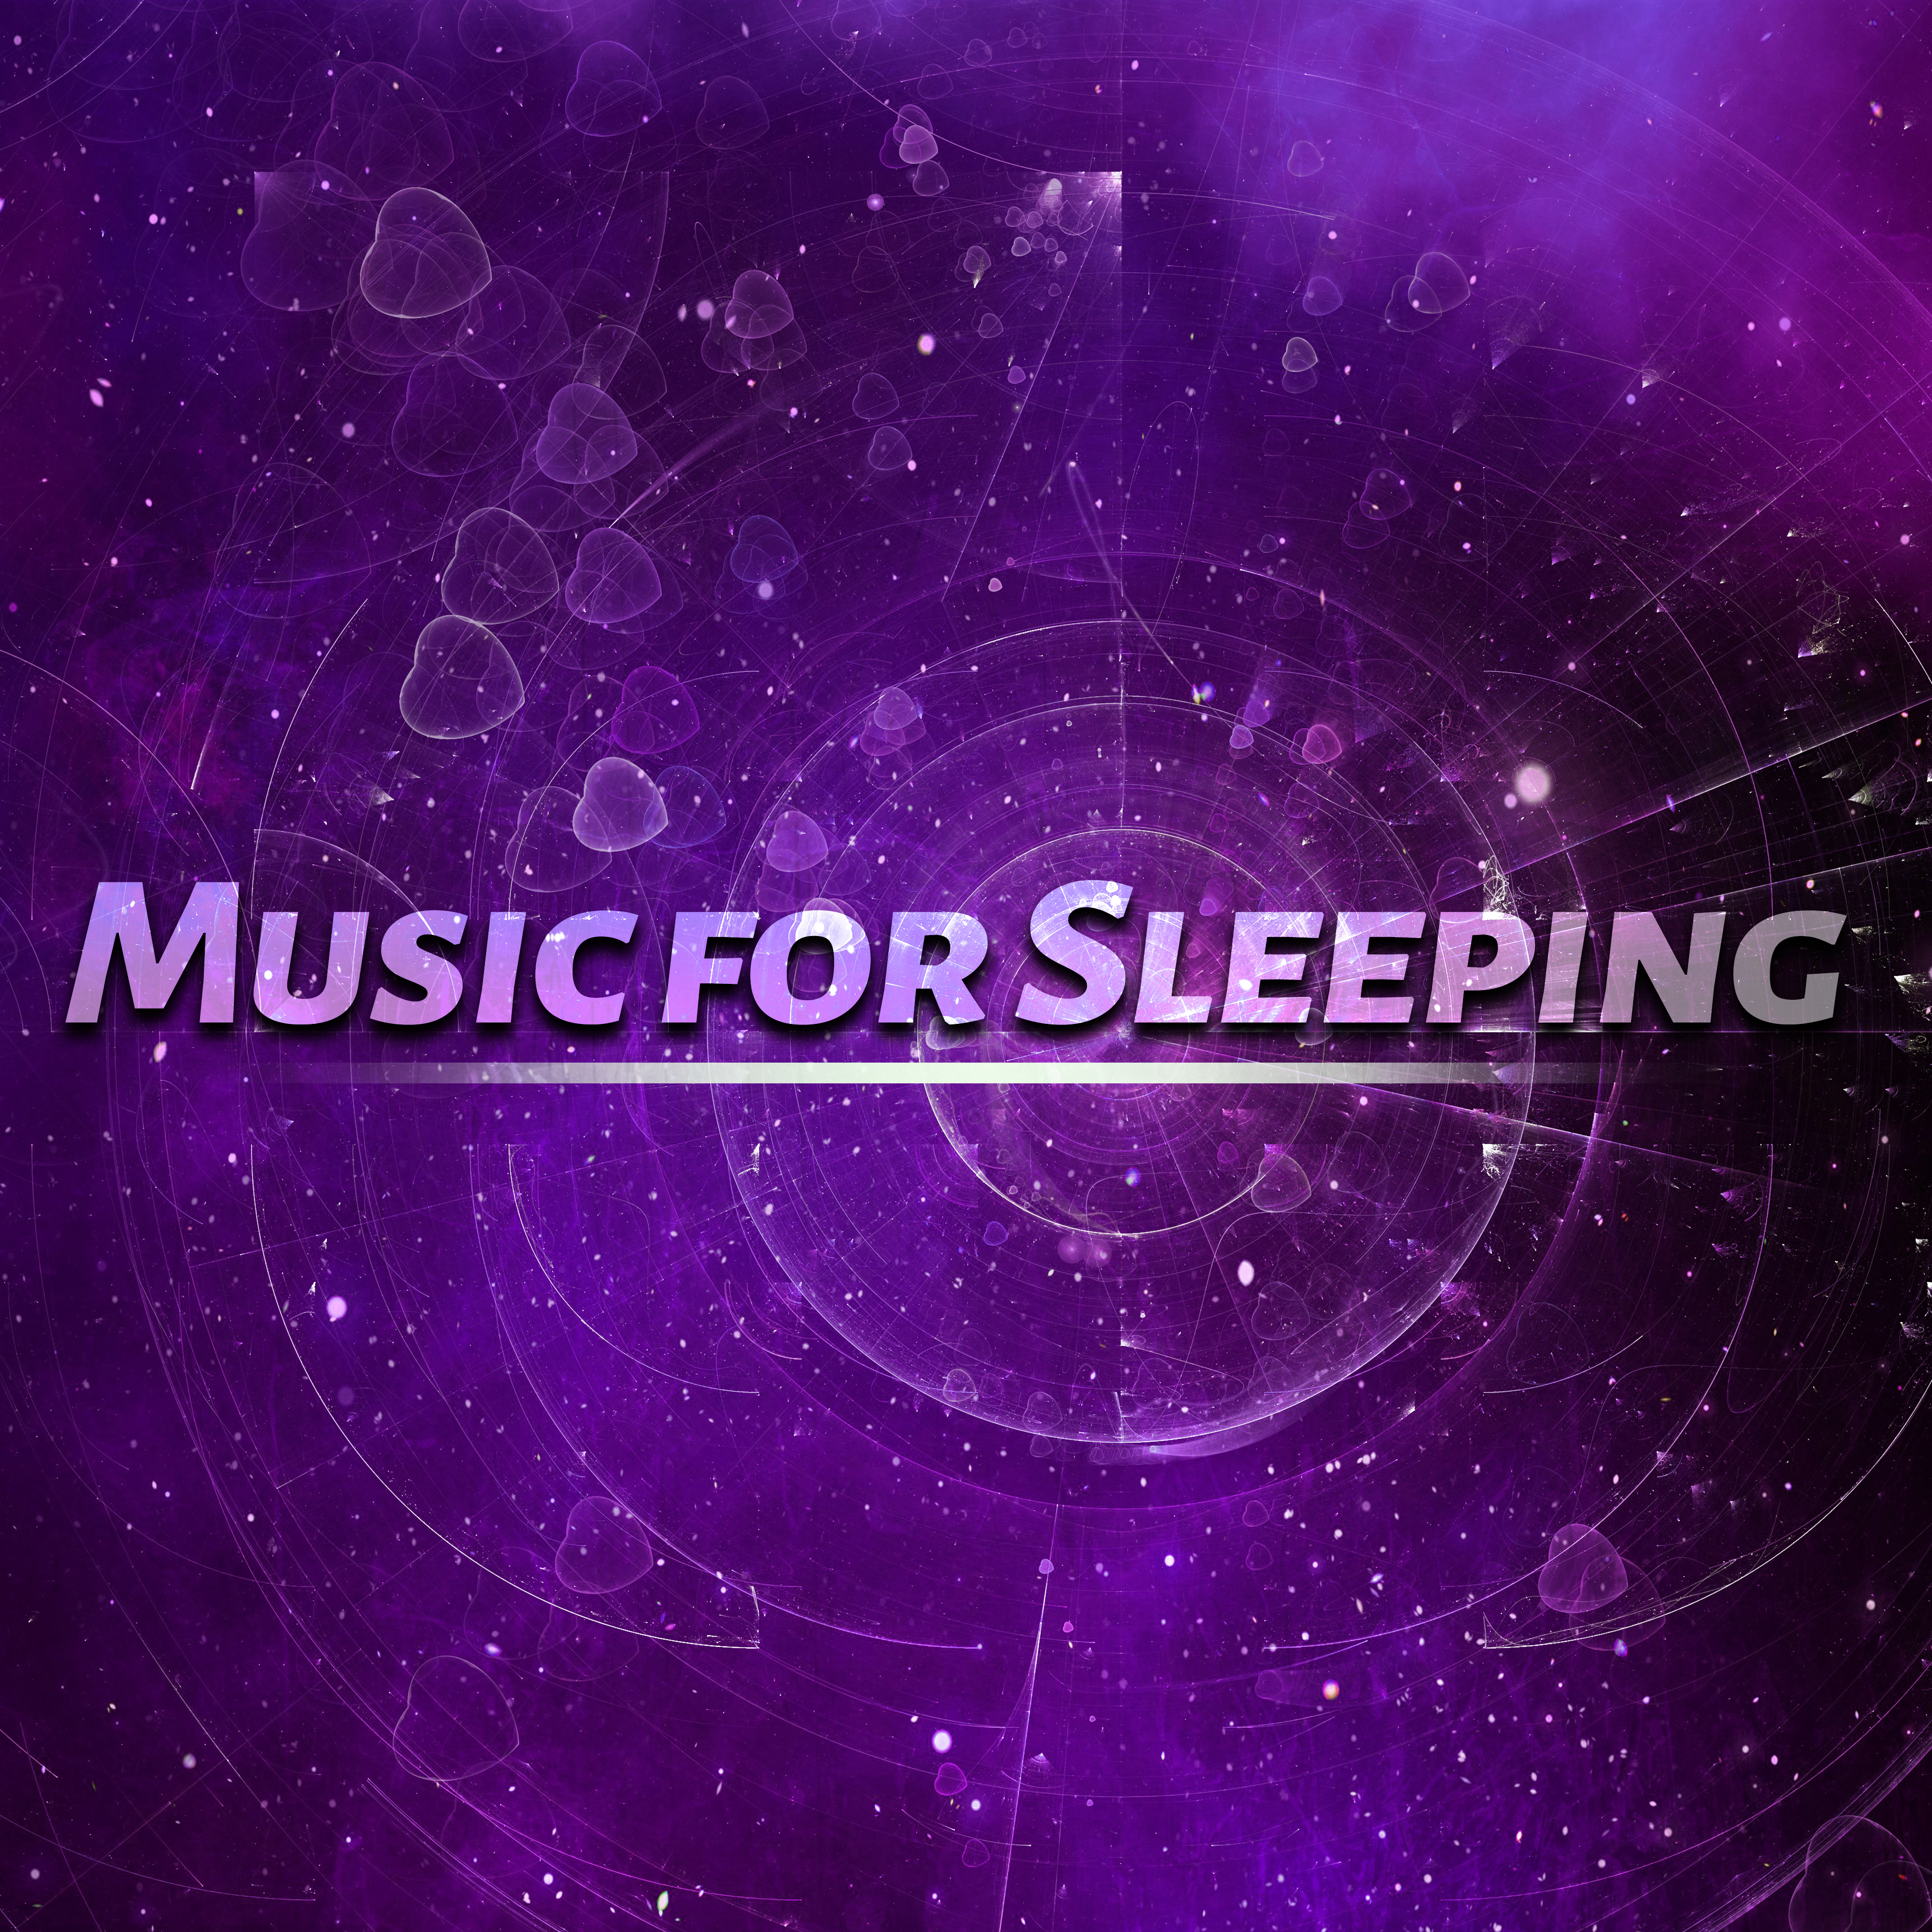 Music for Sleeping  Peaceful Sounds of Nature, Healing Music, Soothing Rain, Ocean Waves for Calm Down, Deep Relax  Good Night, Easily Fall Asleep